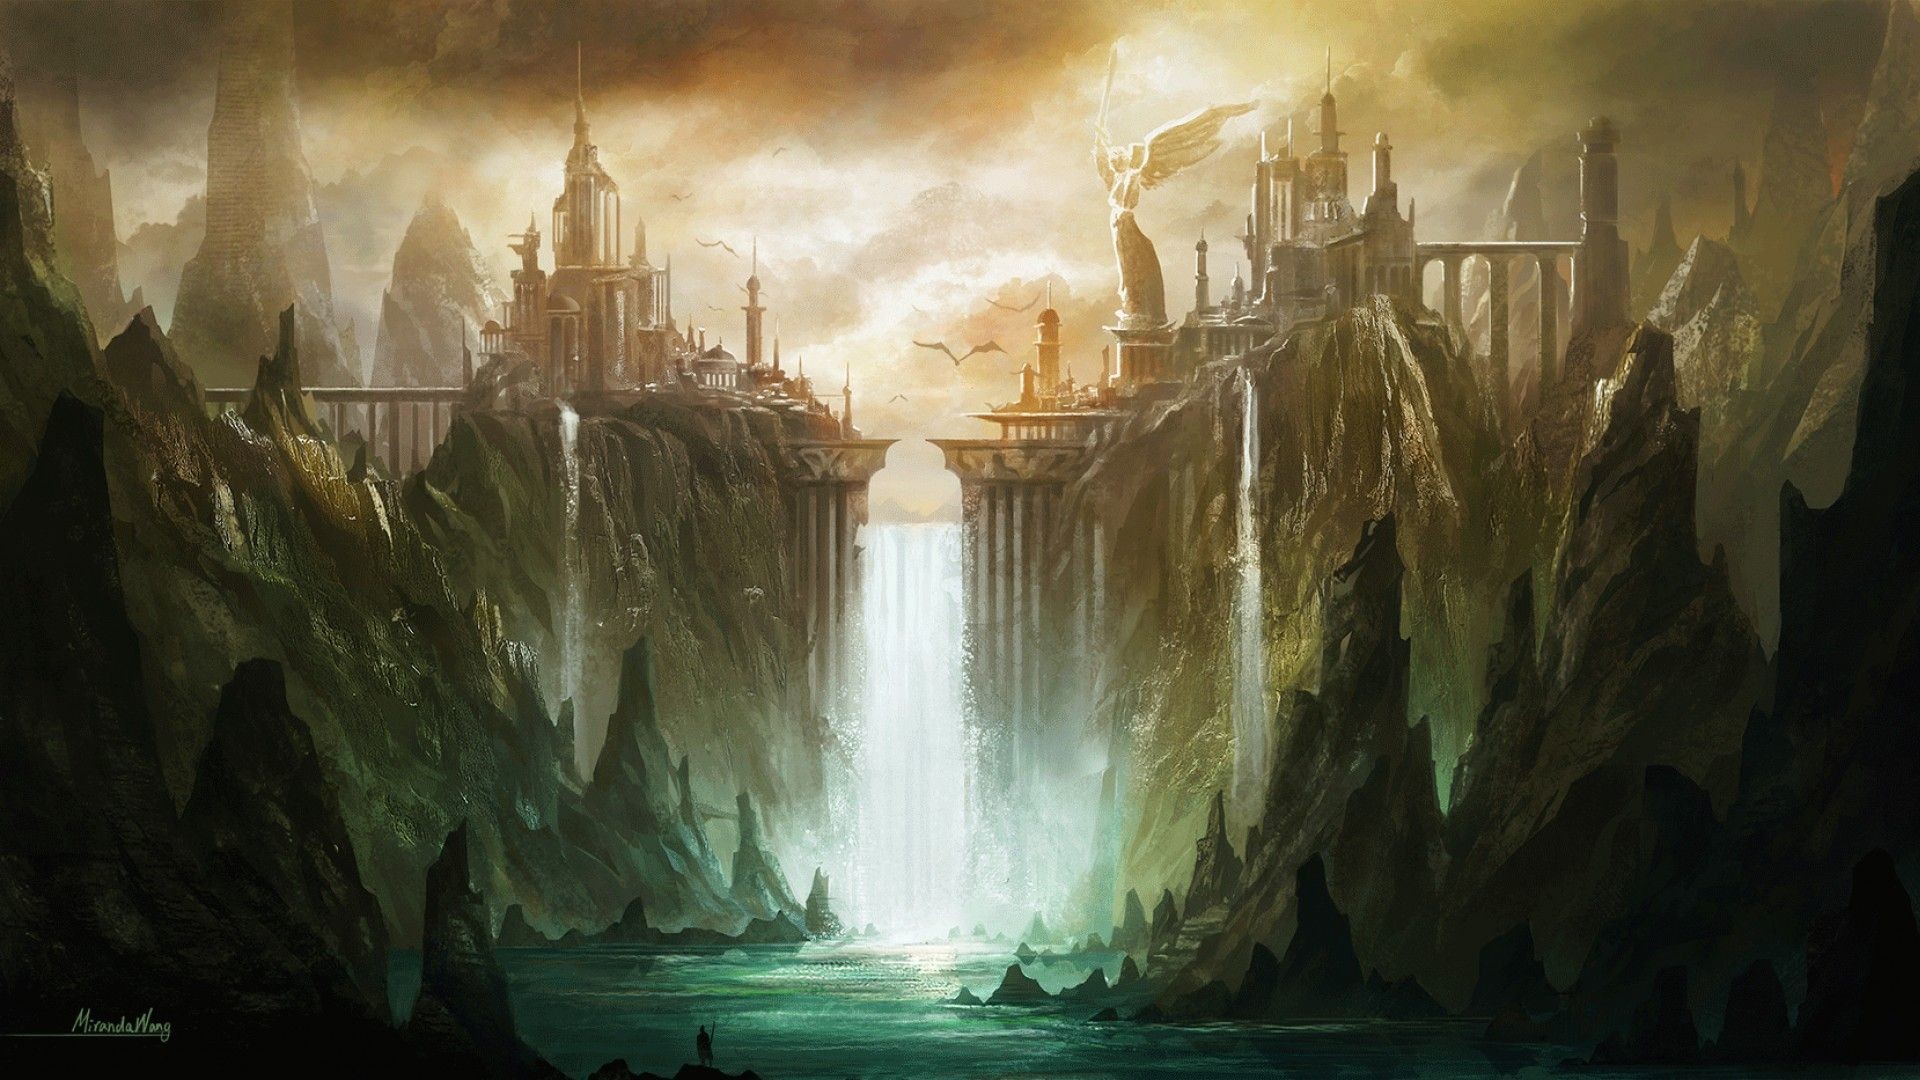 1920x1080 fantasy art landscapes and buildings - Google Search